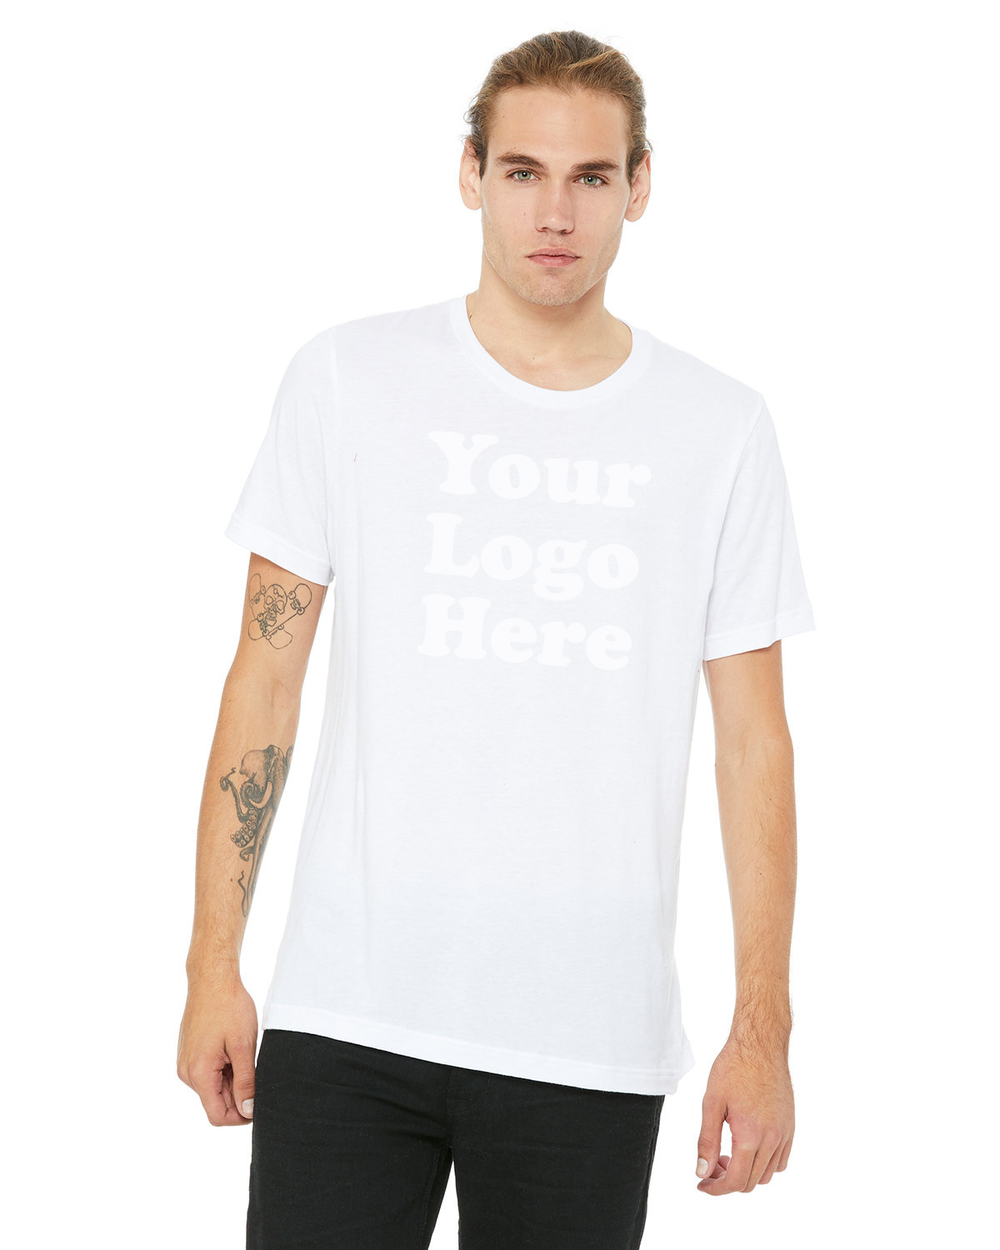 WHITE T-SHIRT + PRINTING SPECIAL